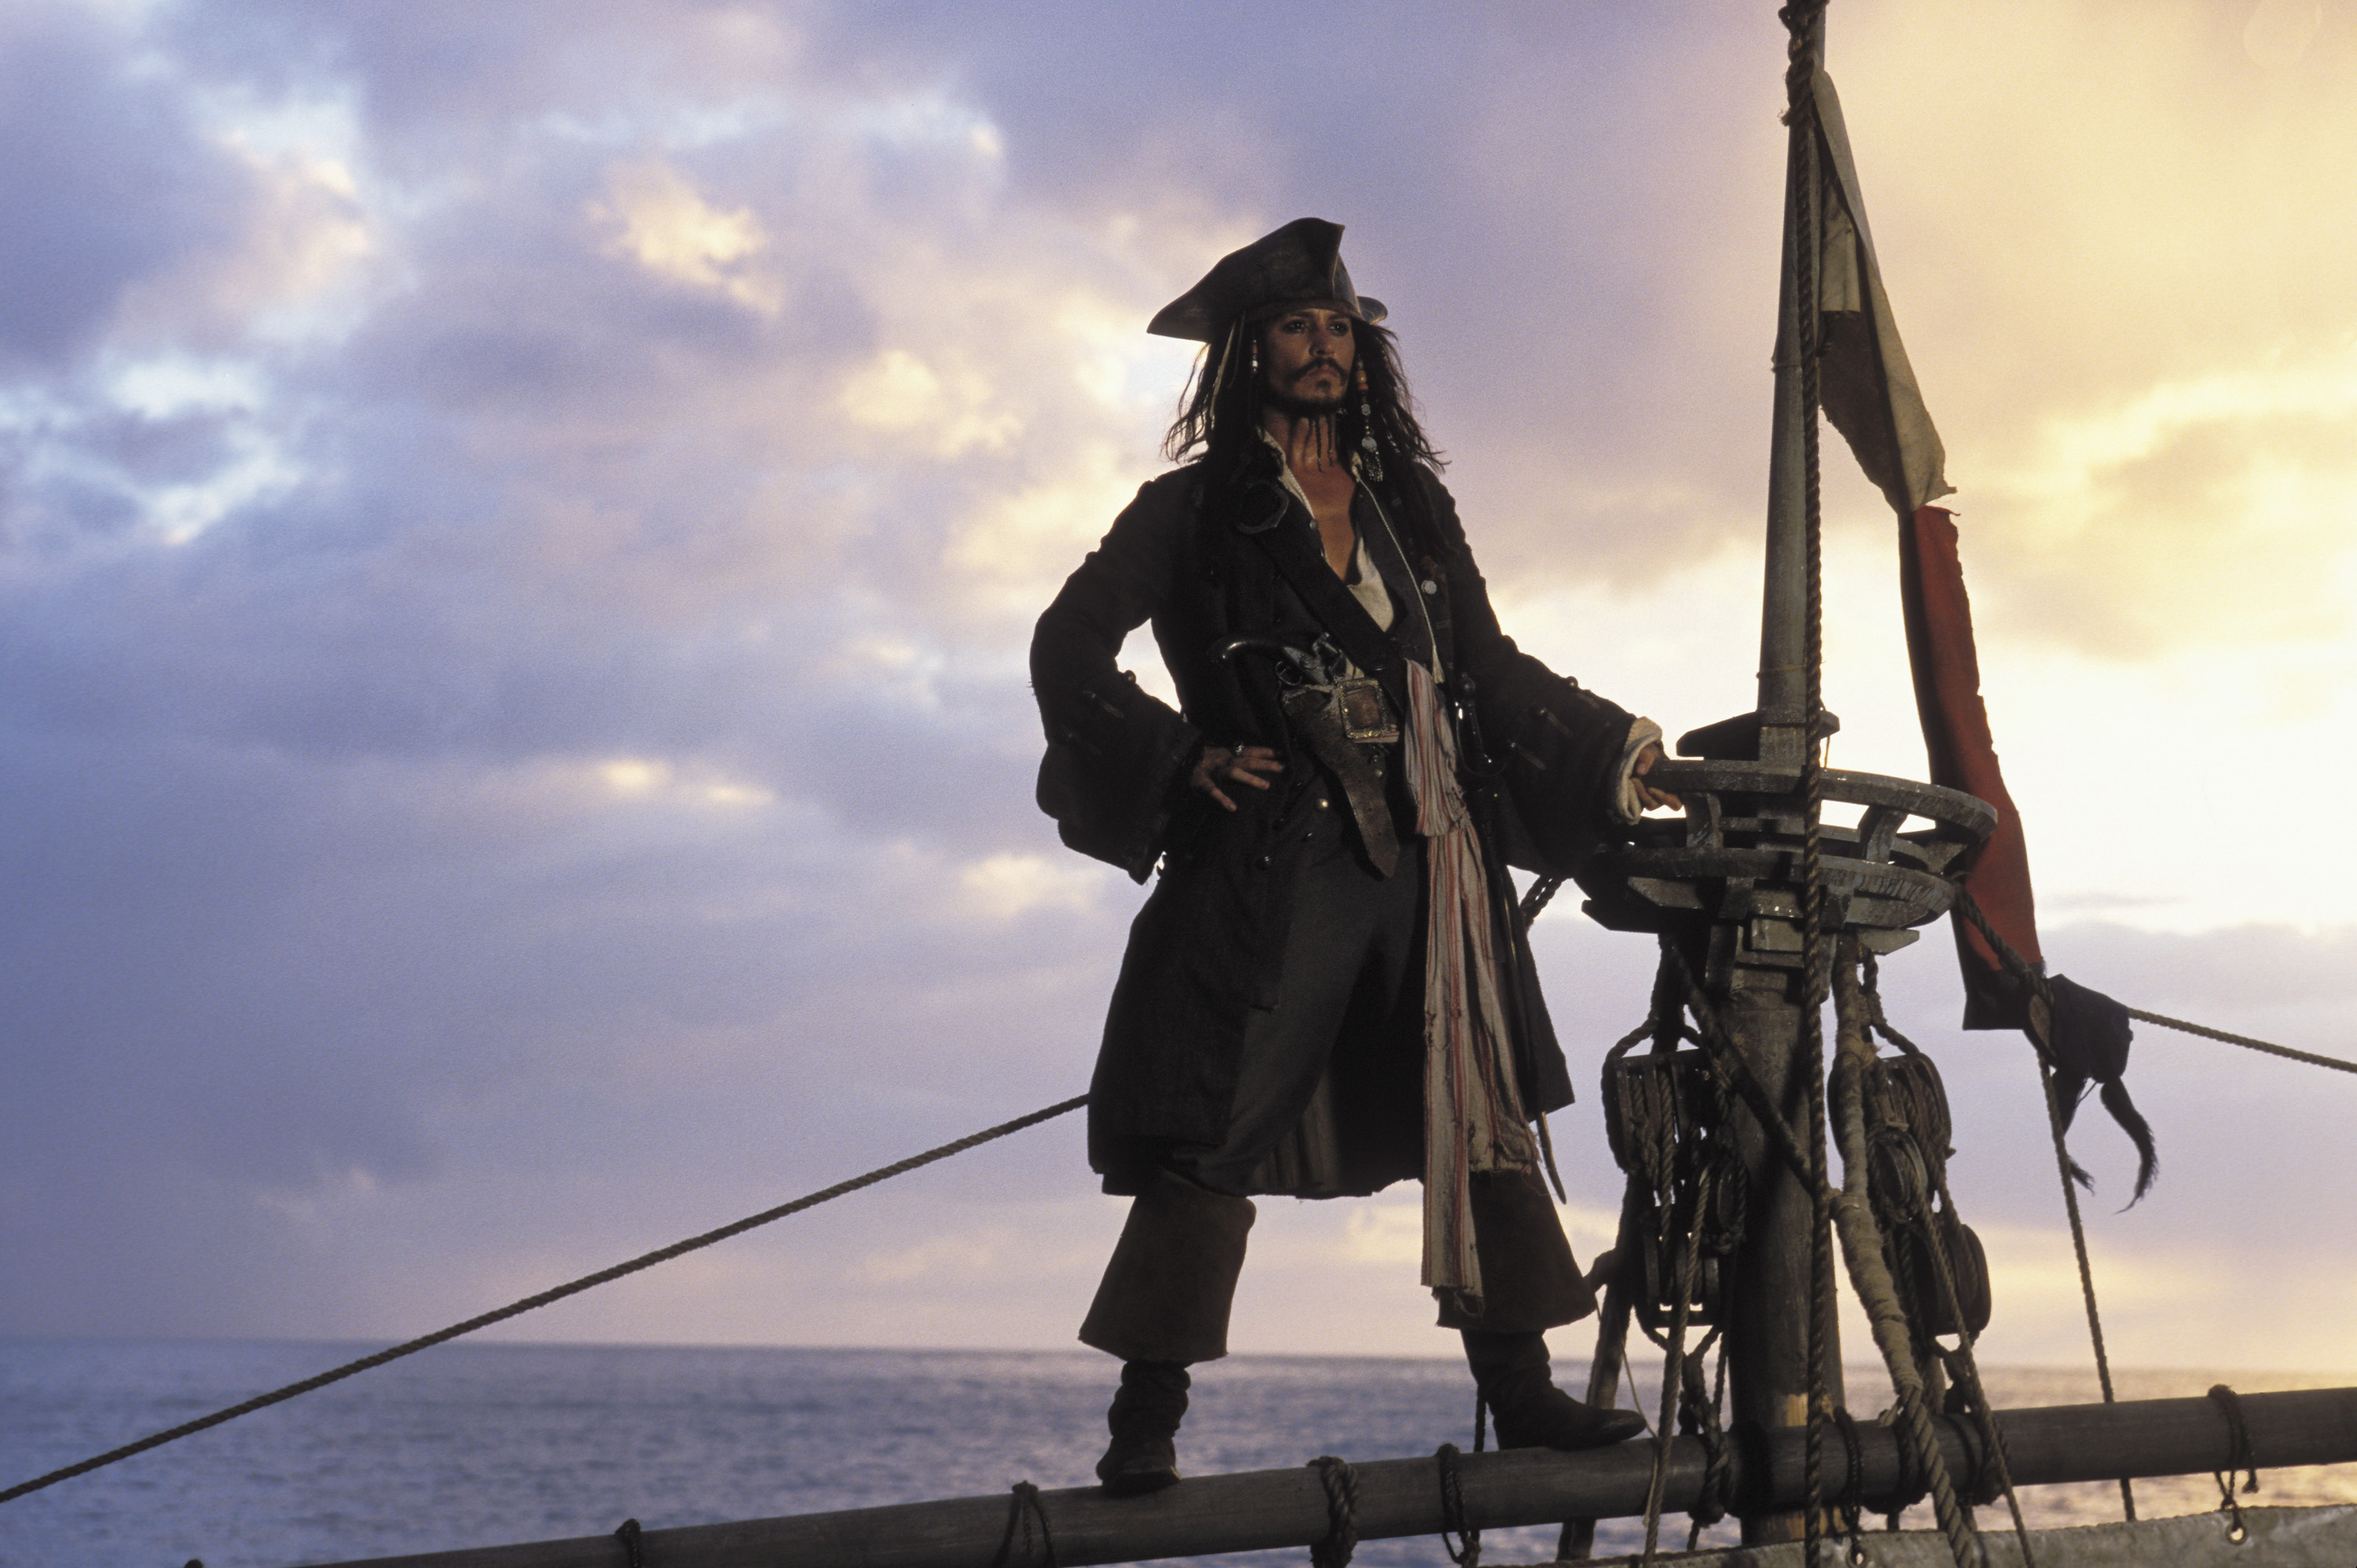 180+ Jack Sparrow HD Wallpapers and Backgrounds